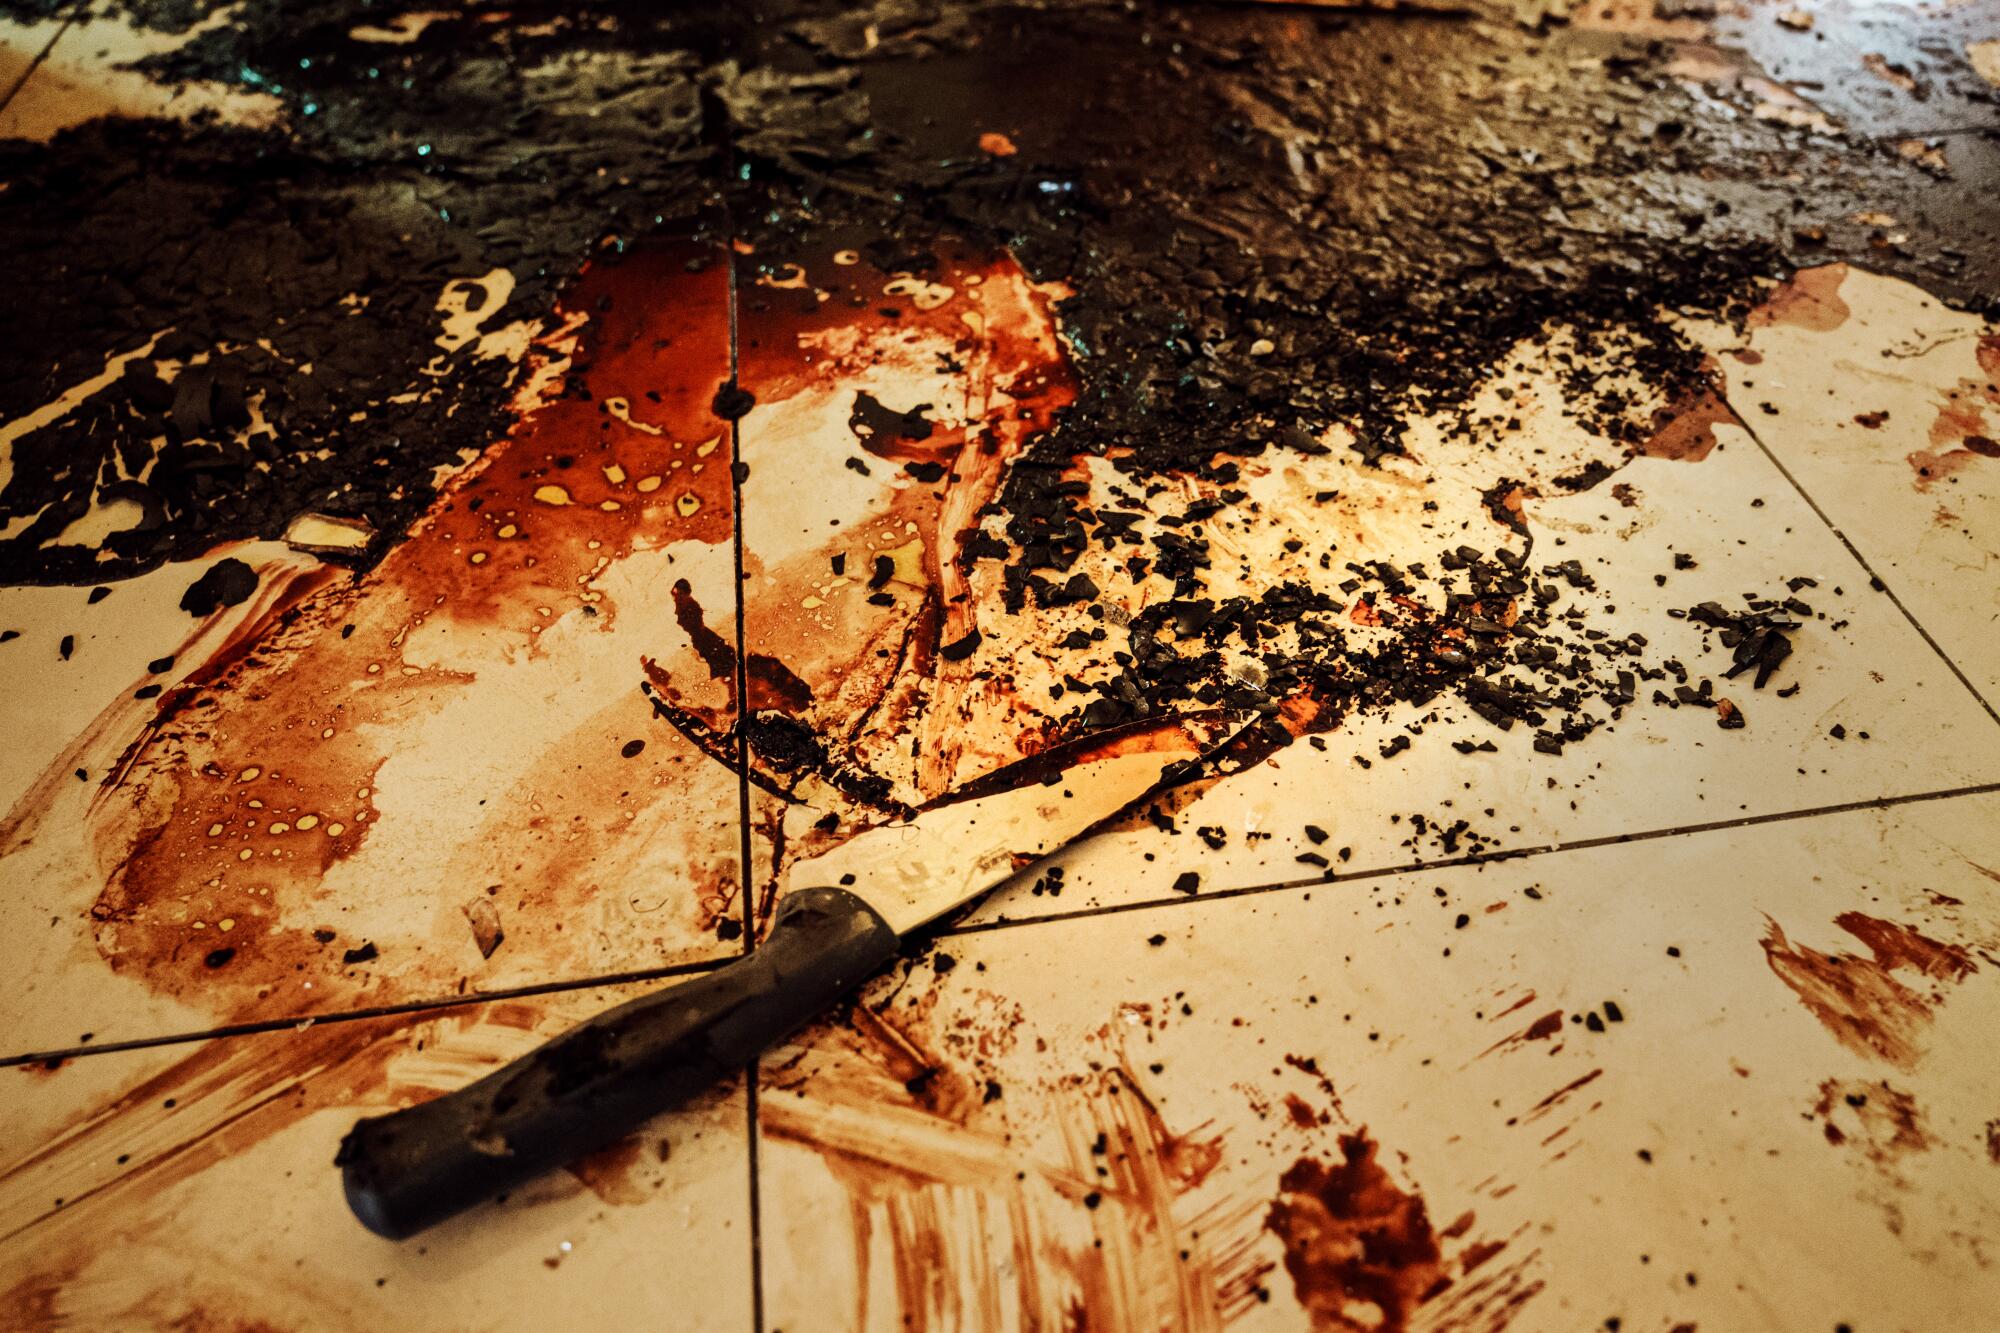 A bloodied knife spread across the floor inside a home that was forced into